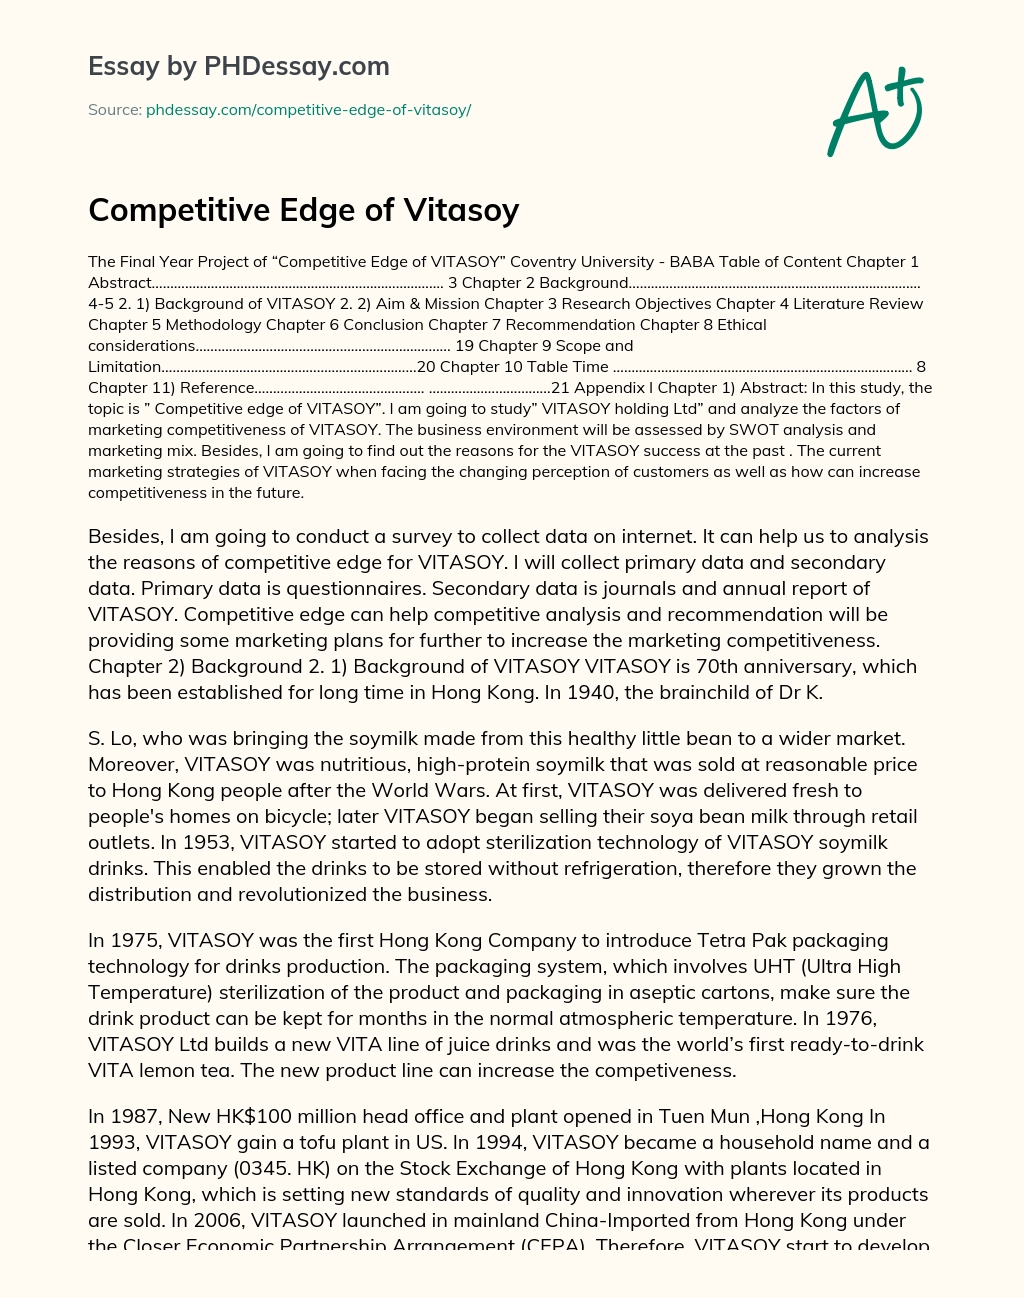 Competitive Edge of Vitasoy essay